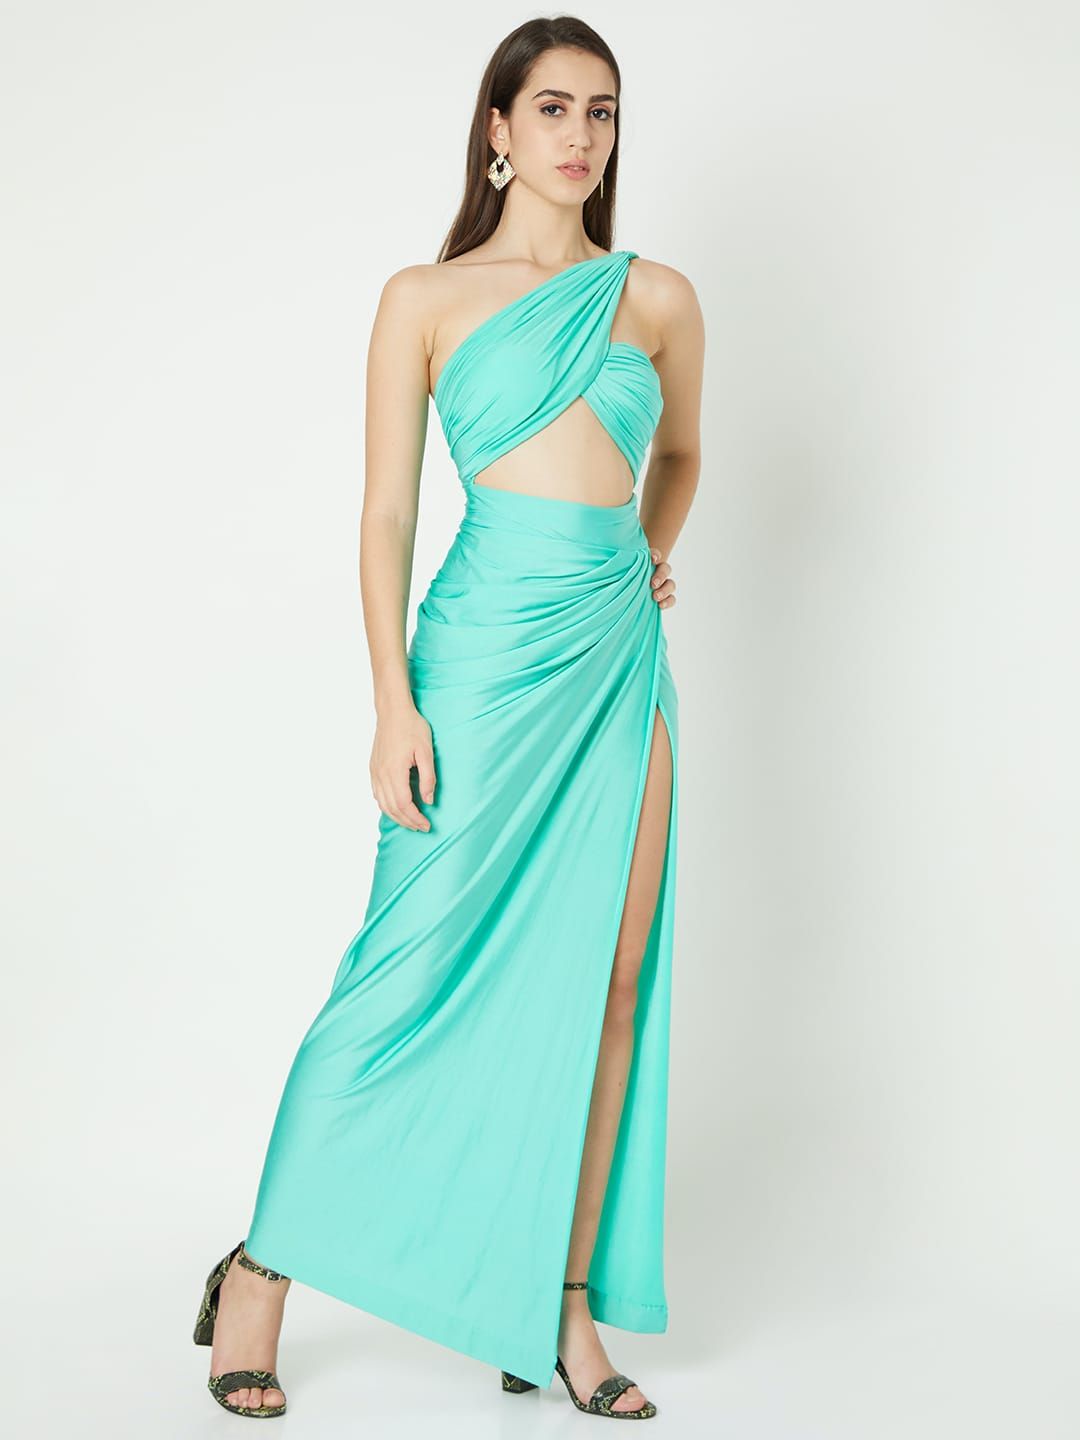 The Shai Resort Cocktail Gowns - Reema Anand Label